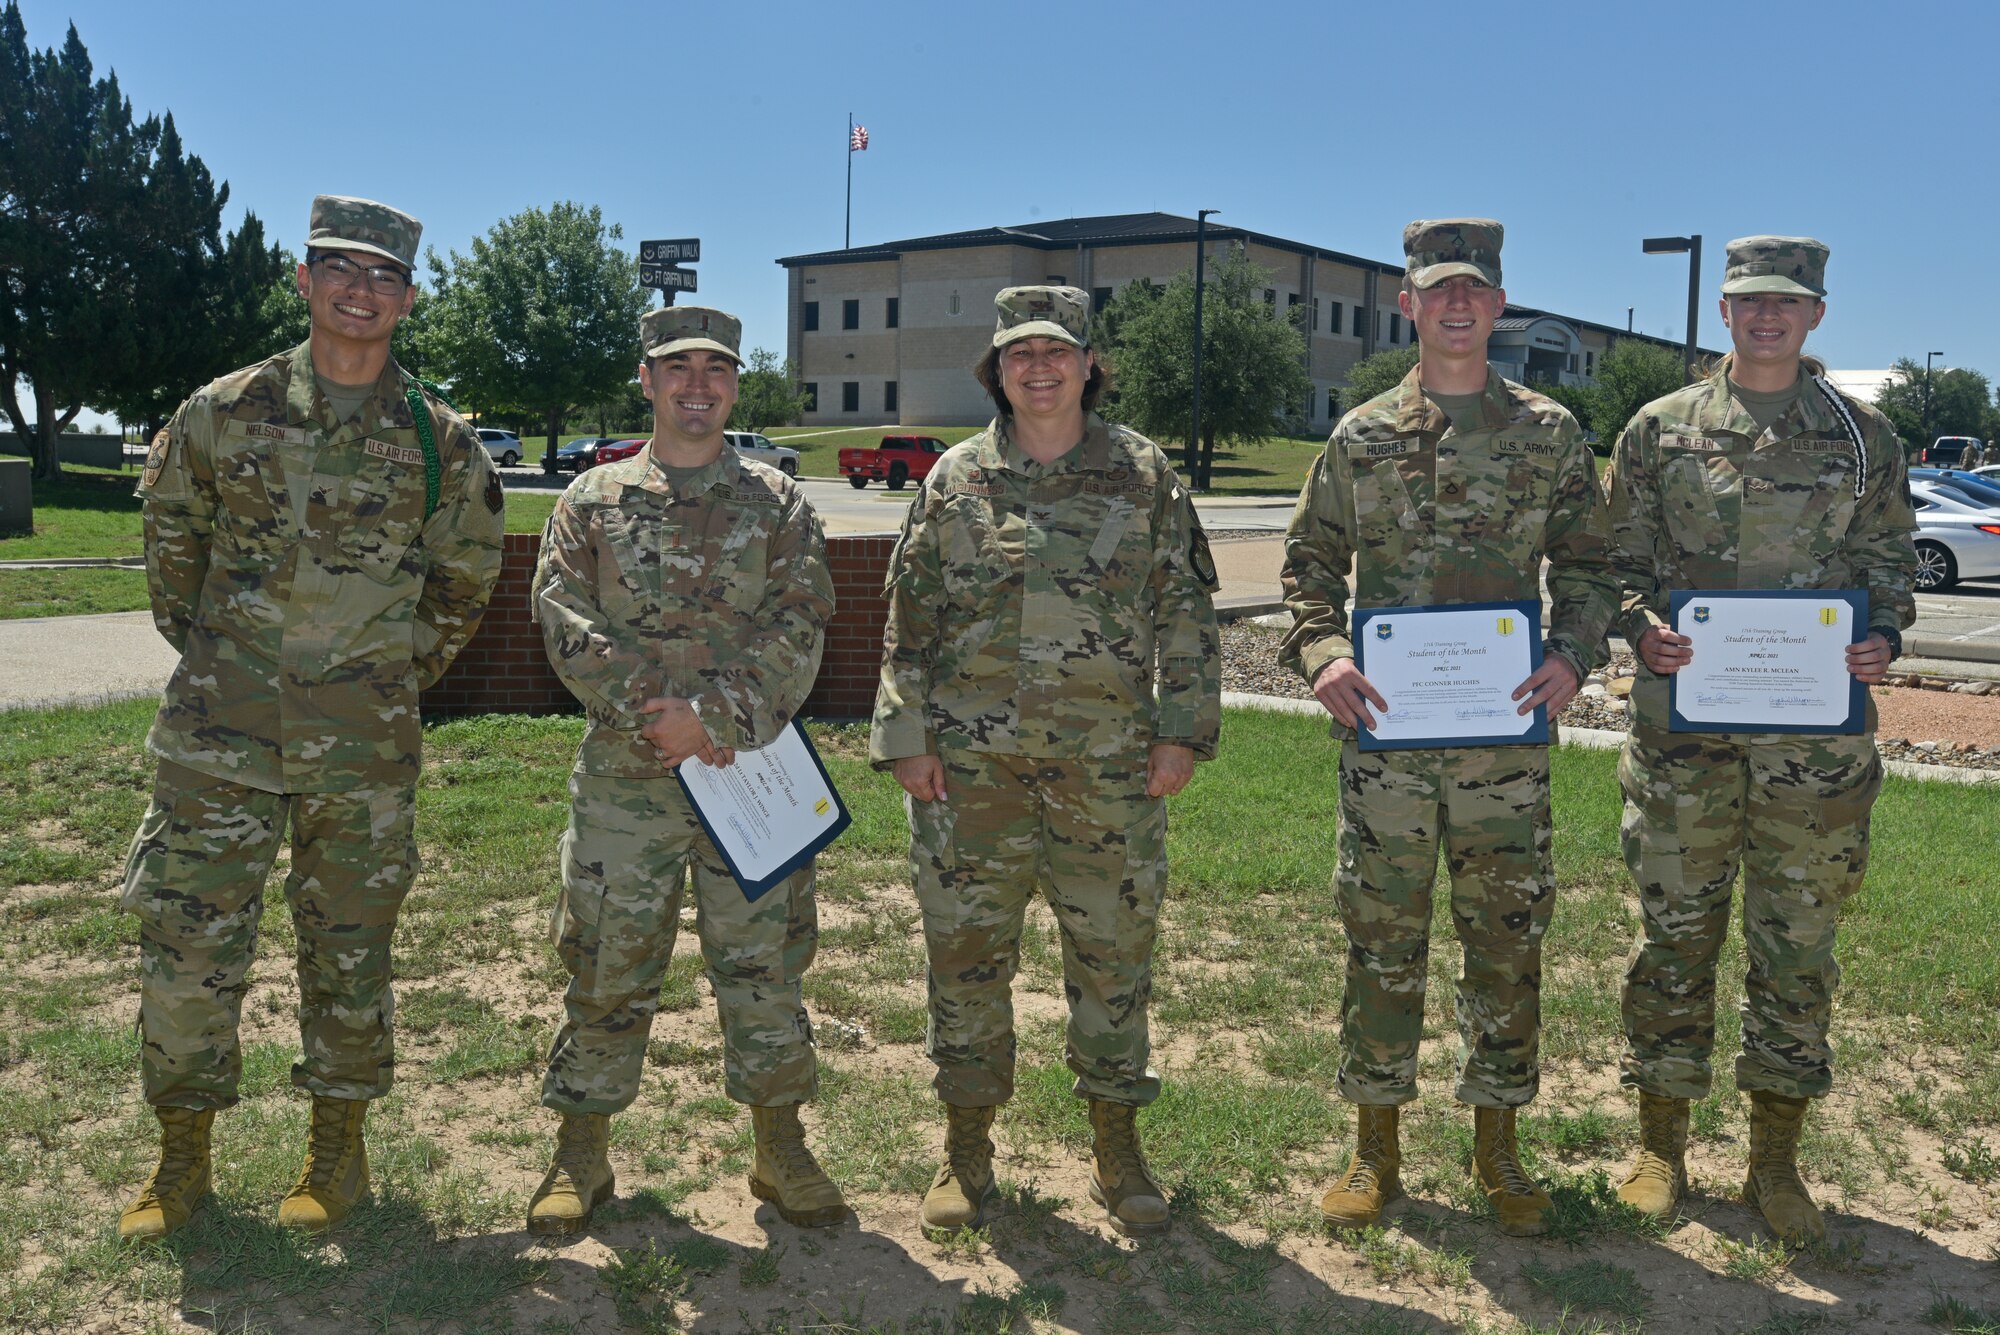 U.S. Air Force Col. Angelina Maguinness, 17th Training Group commander, and students from across the 17th TRG pose for a picture outside of the Brandenburg Hall on Goodfellow Air Force Base, Texas, May 21, 2021. Each student was nominated to receive their award based on votes received by fellow students and instructors of their respective squadrons. (U.S. Air Force photo by Senior Airman Ashley Thrash)